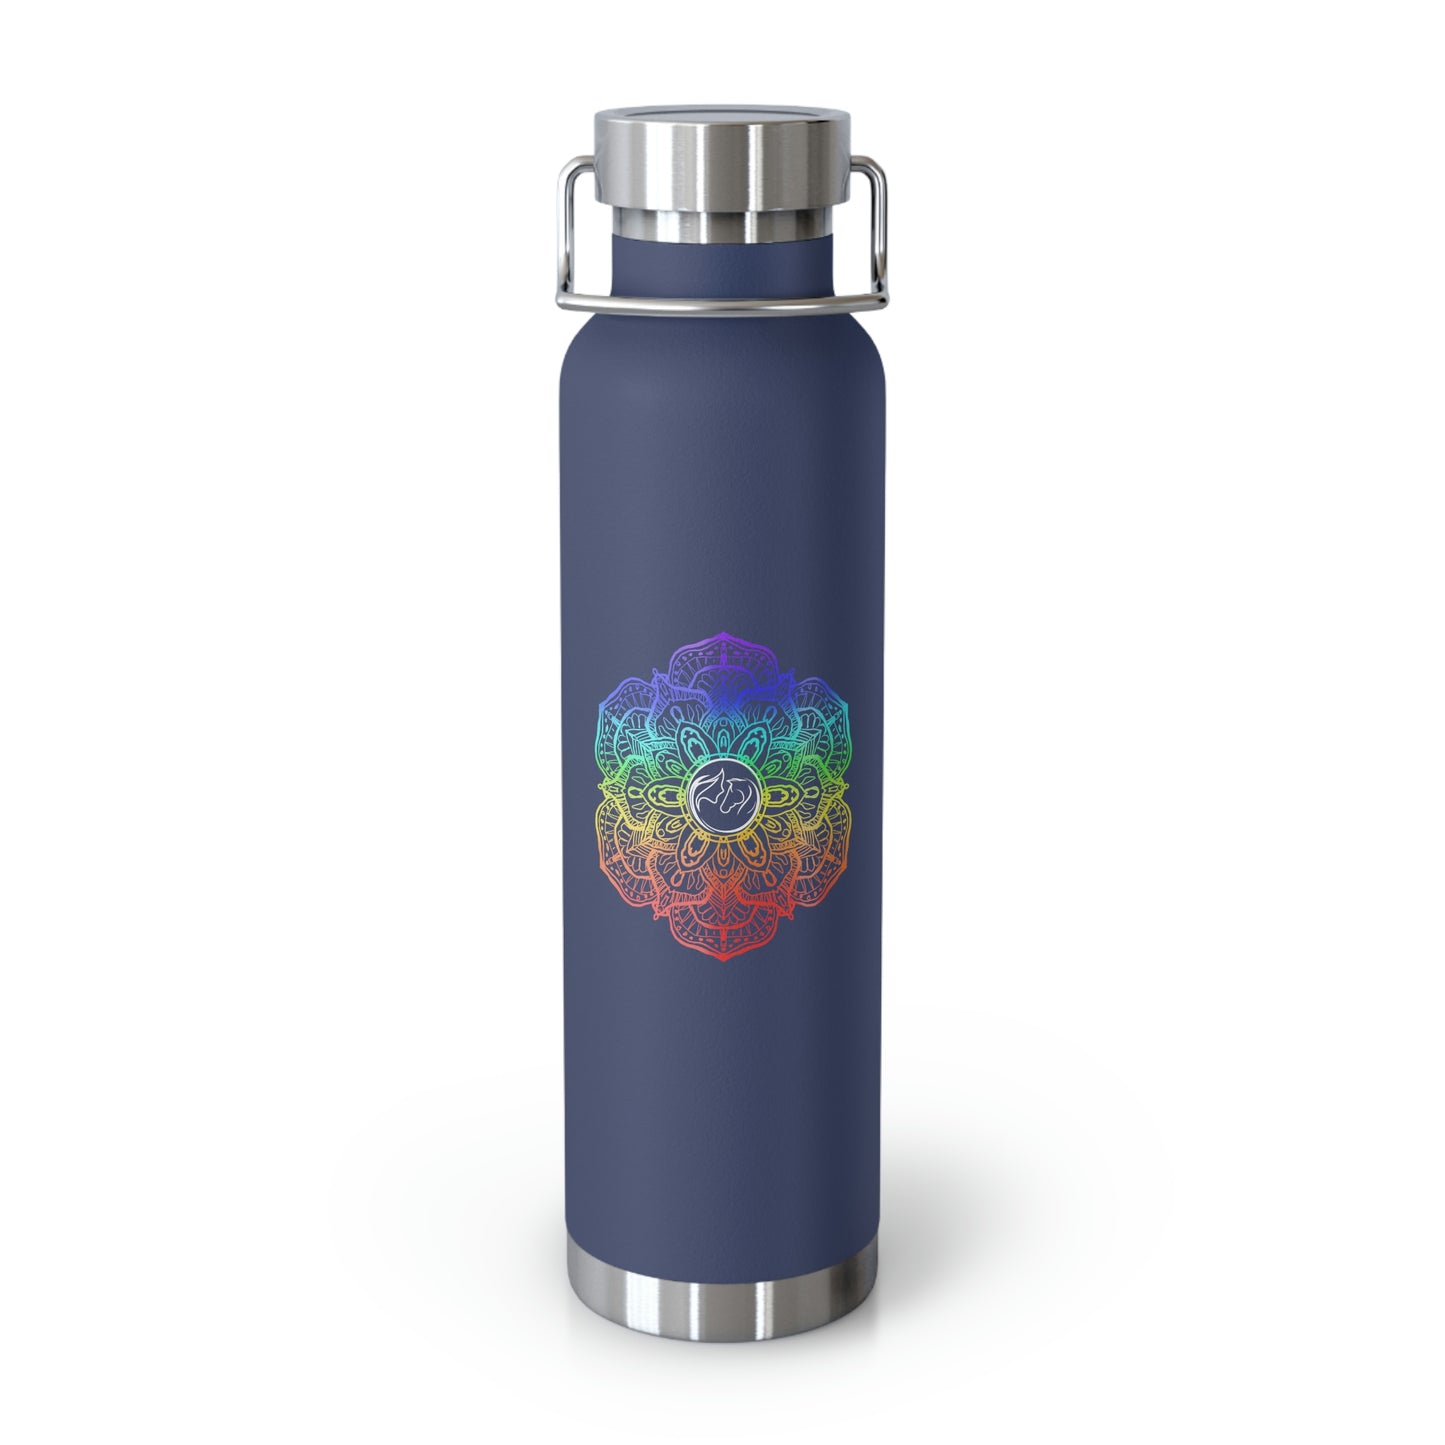 Copper Vacuum Insulated Bottle, 22oz with Chakra Design